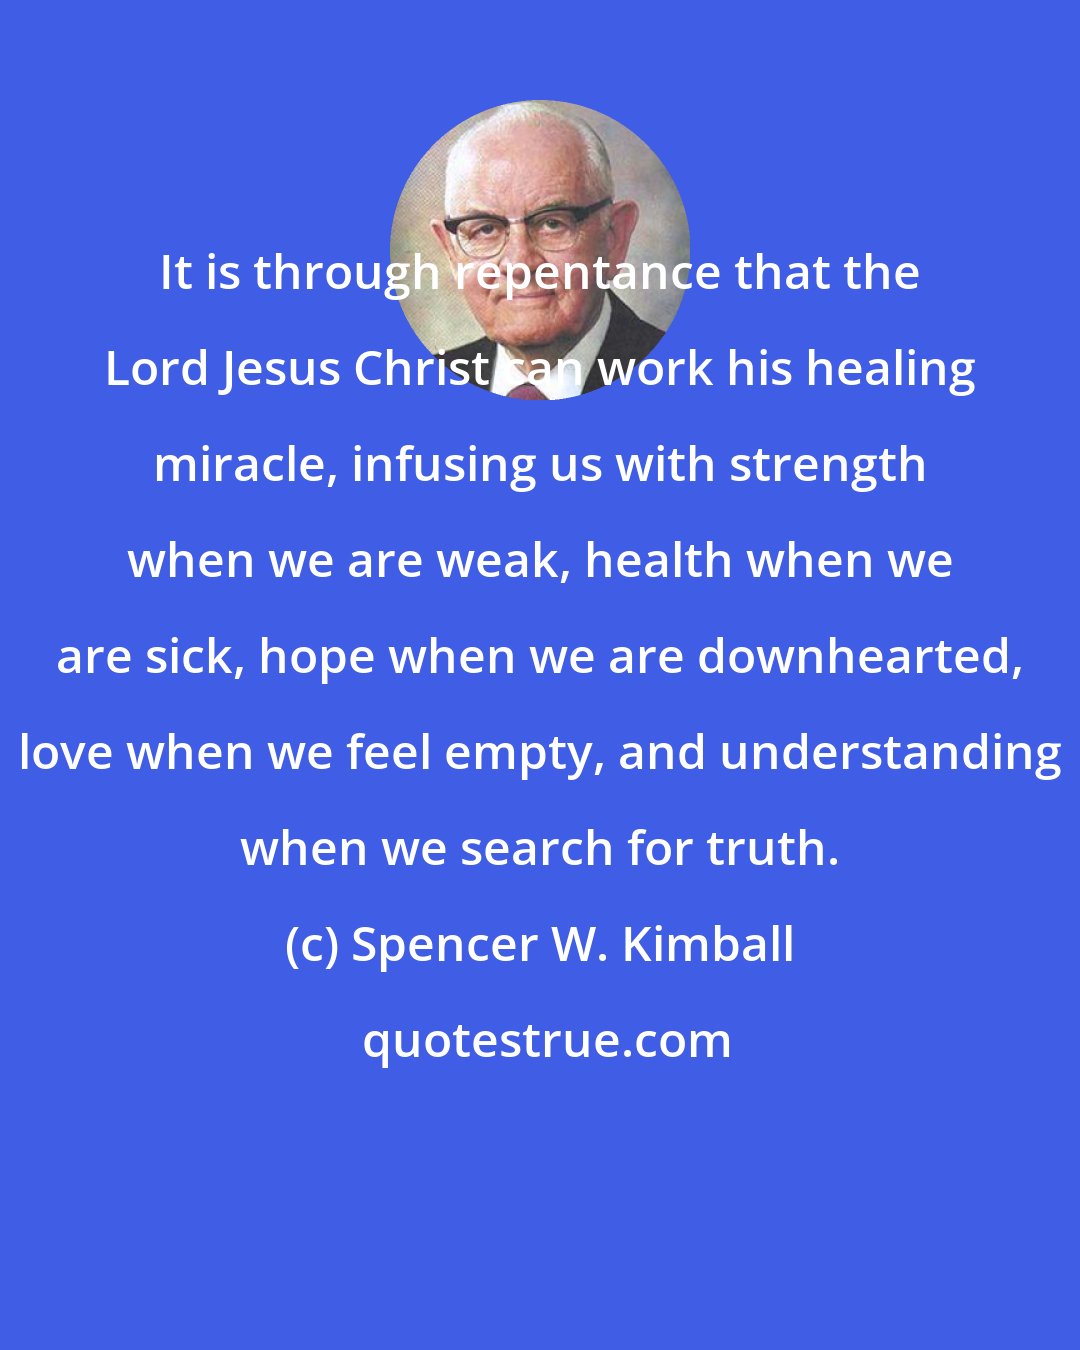 Spencer W. Kimball: It is through repentance that the Lord Jesus Christ can work his healing miracle, infusing us with strength when we are weak, health when we are sick, hope when we are downhearted, love when we feel empty, and understanding when we search for truth.